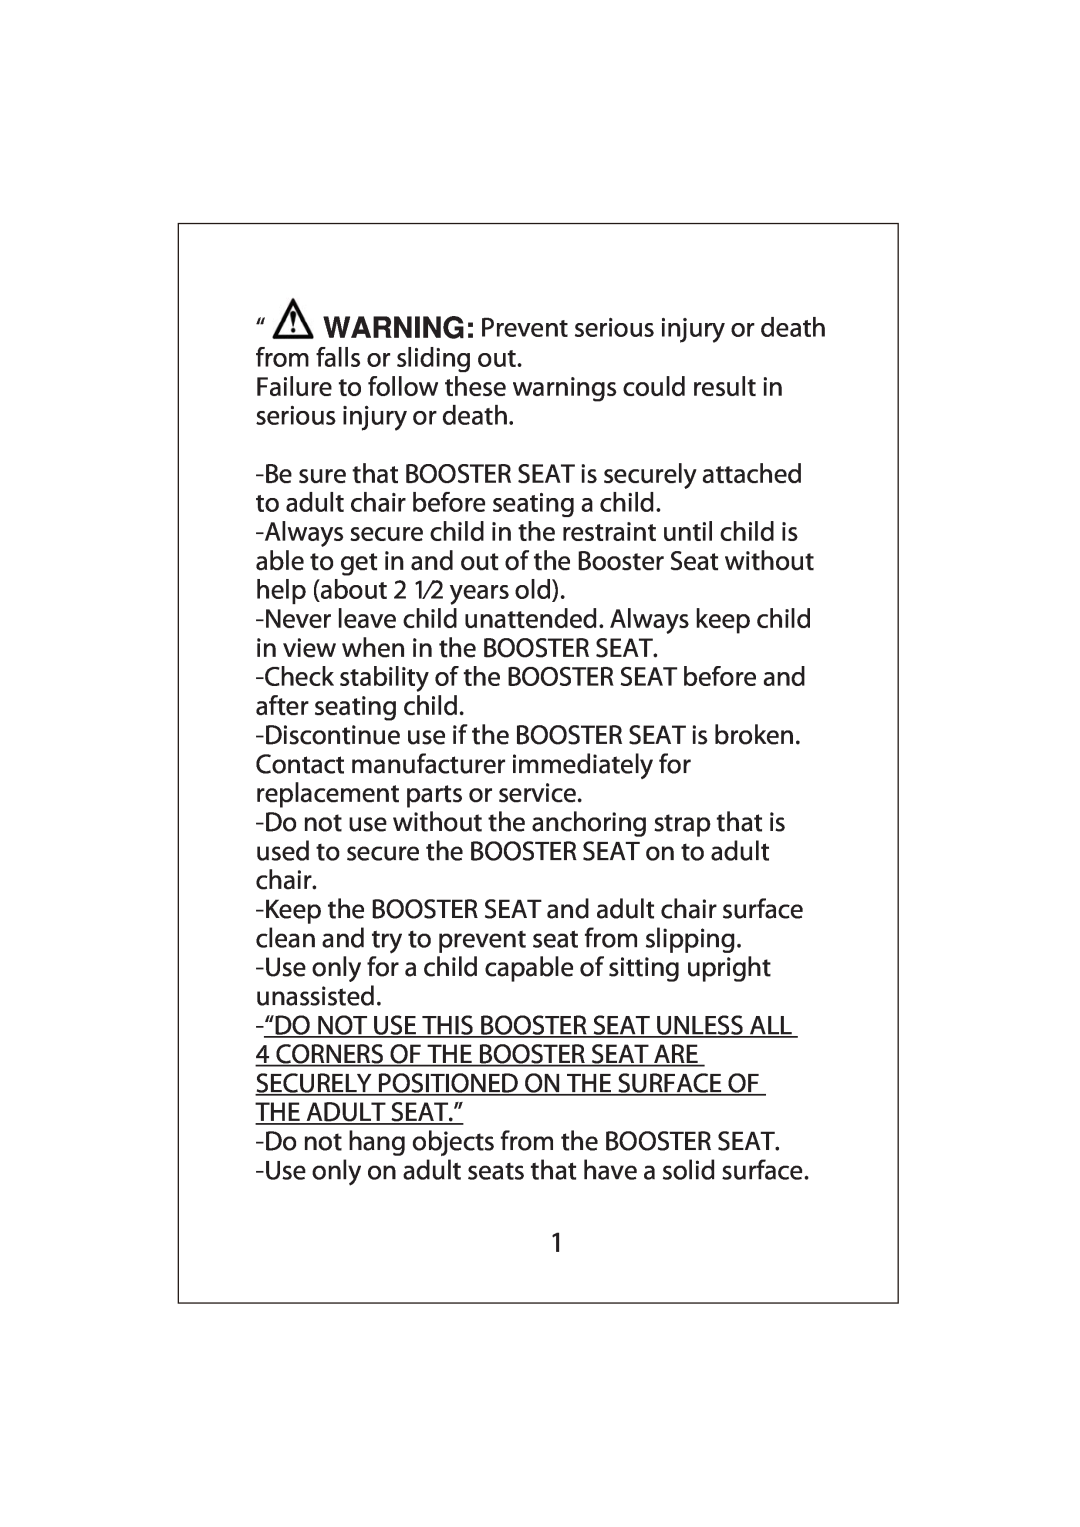 Regalo 3510 owner manual “ WARNING Prevent serious injury or death from falls or sliding out 